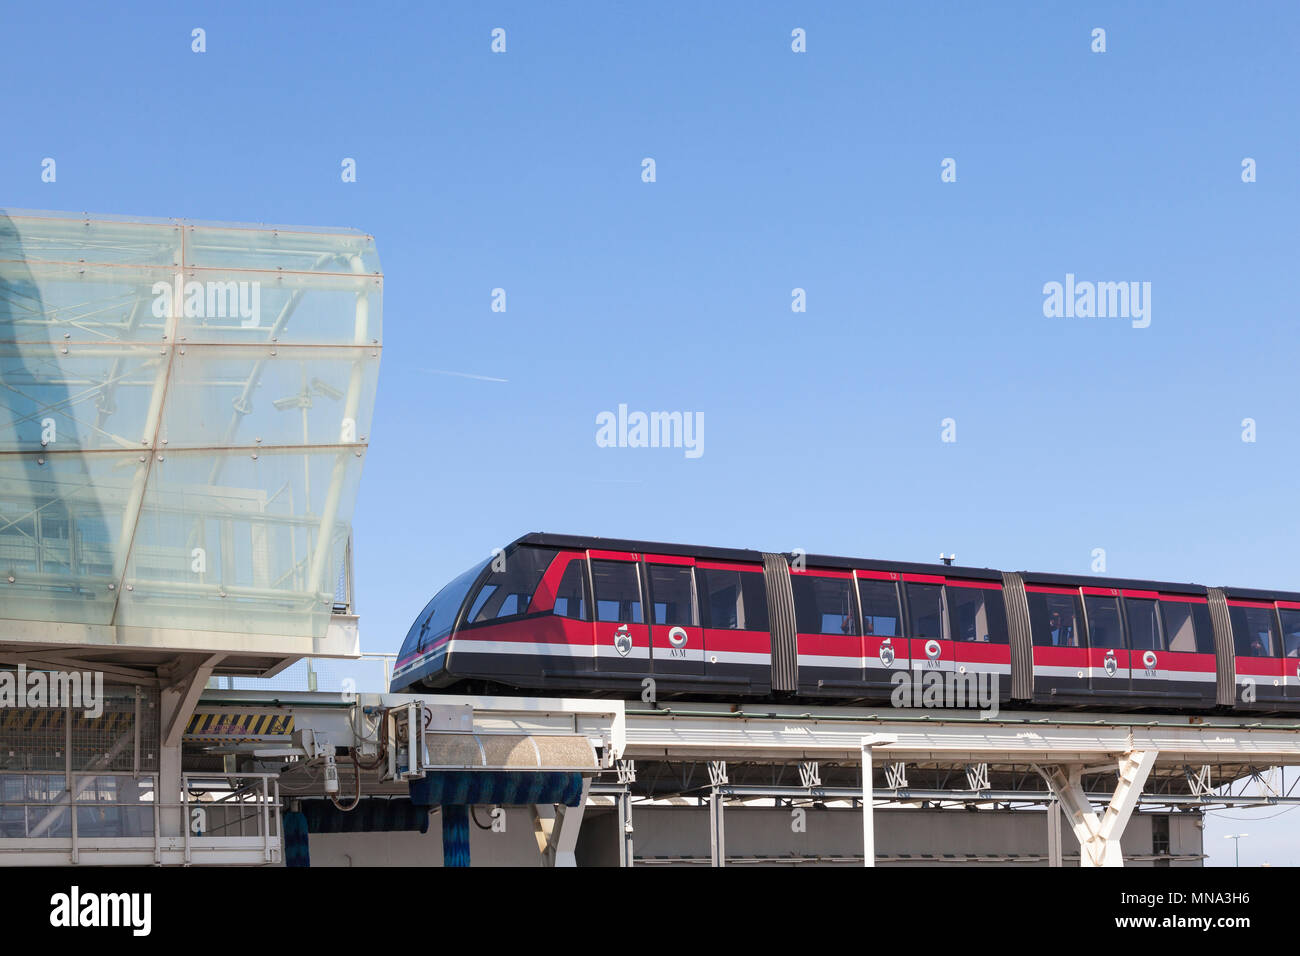 People Mover Monorail Stock Photos & People Mover Monorail Stock Images ...